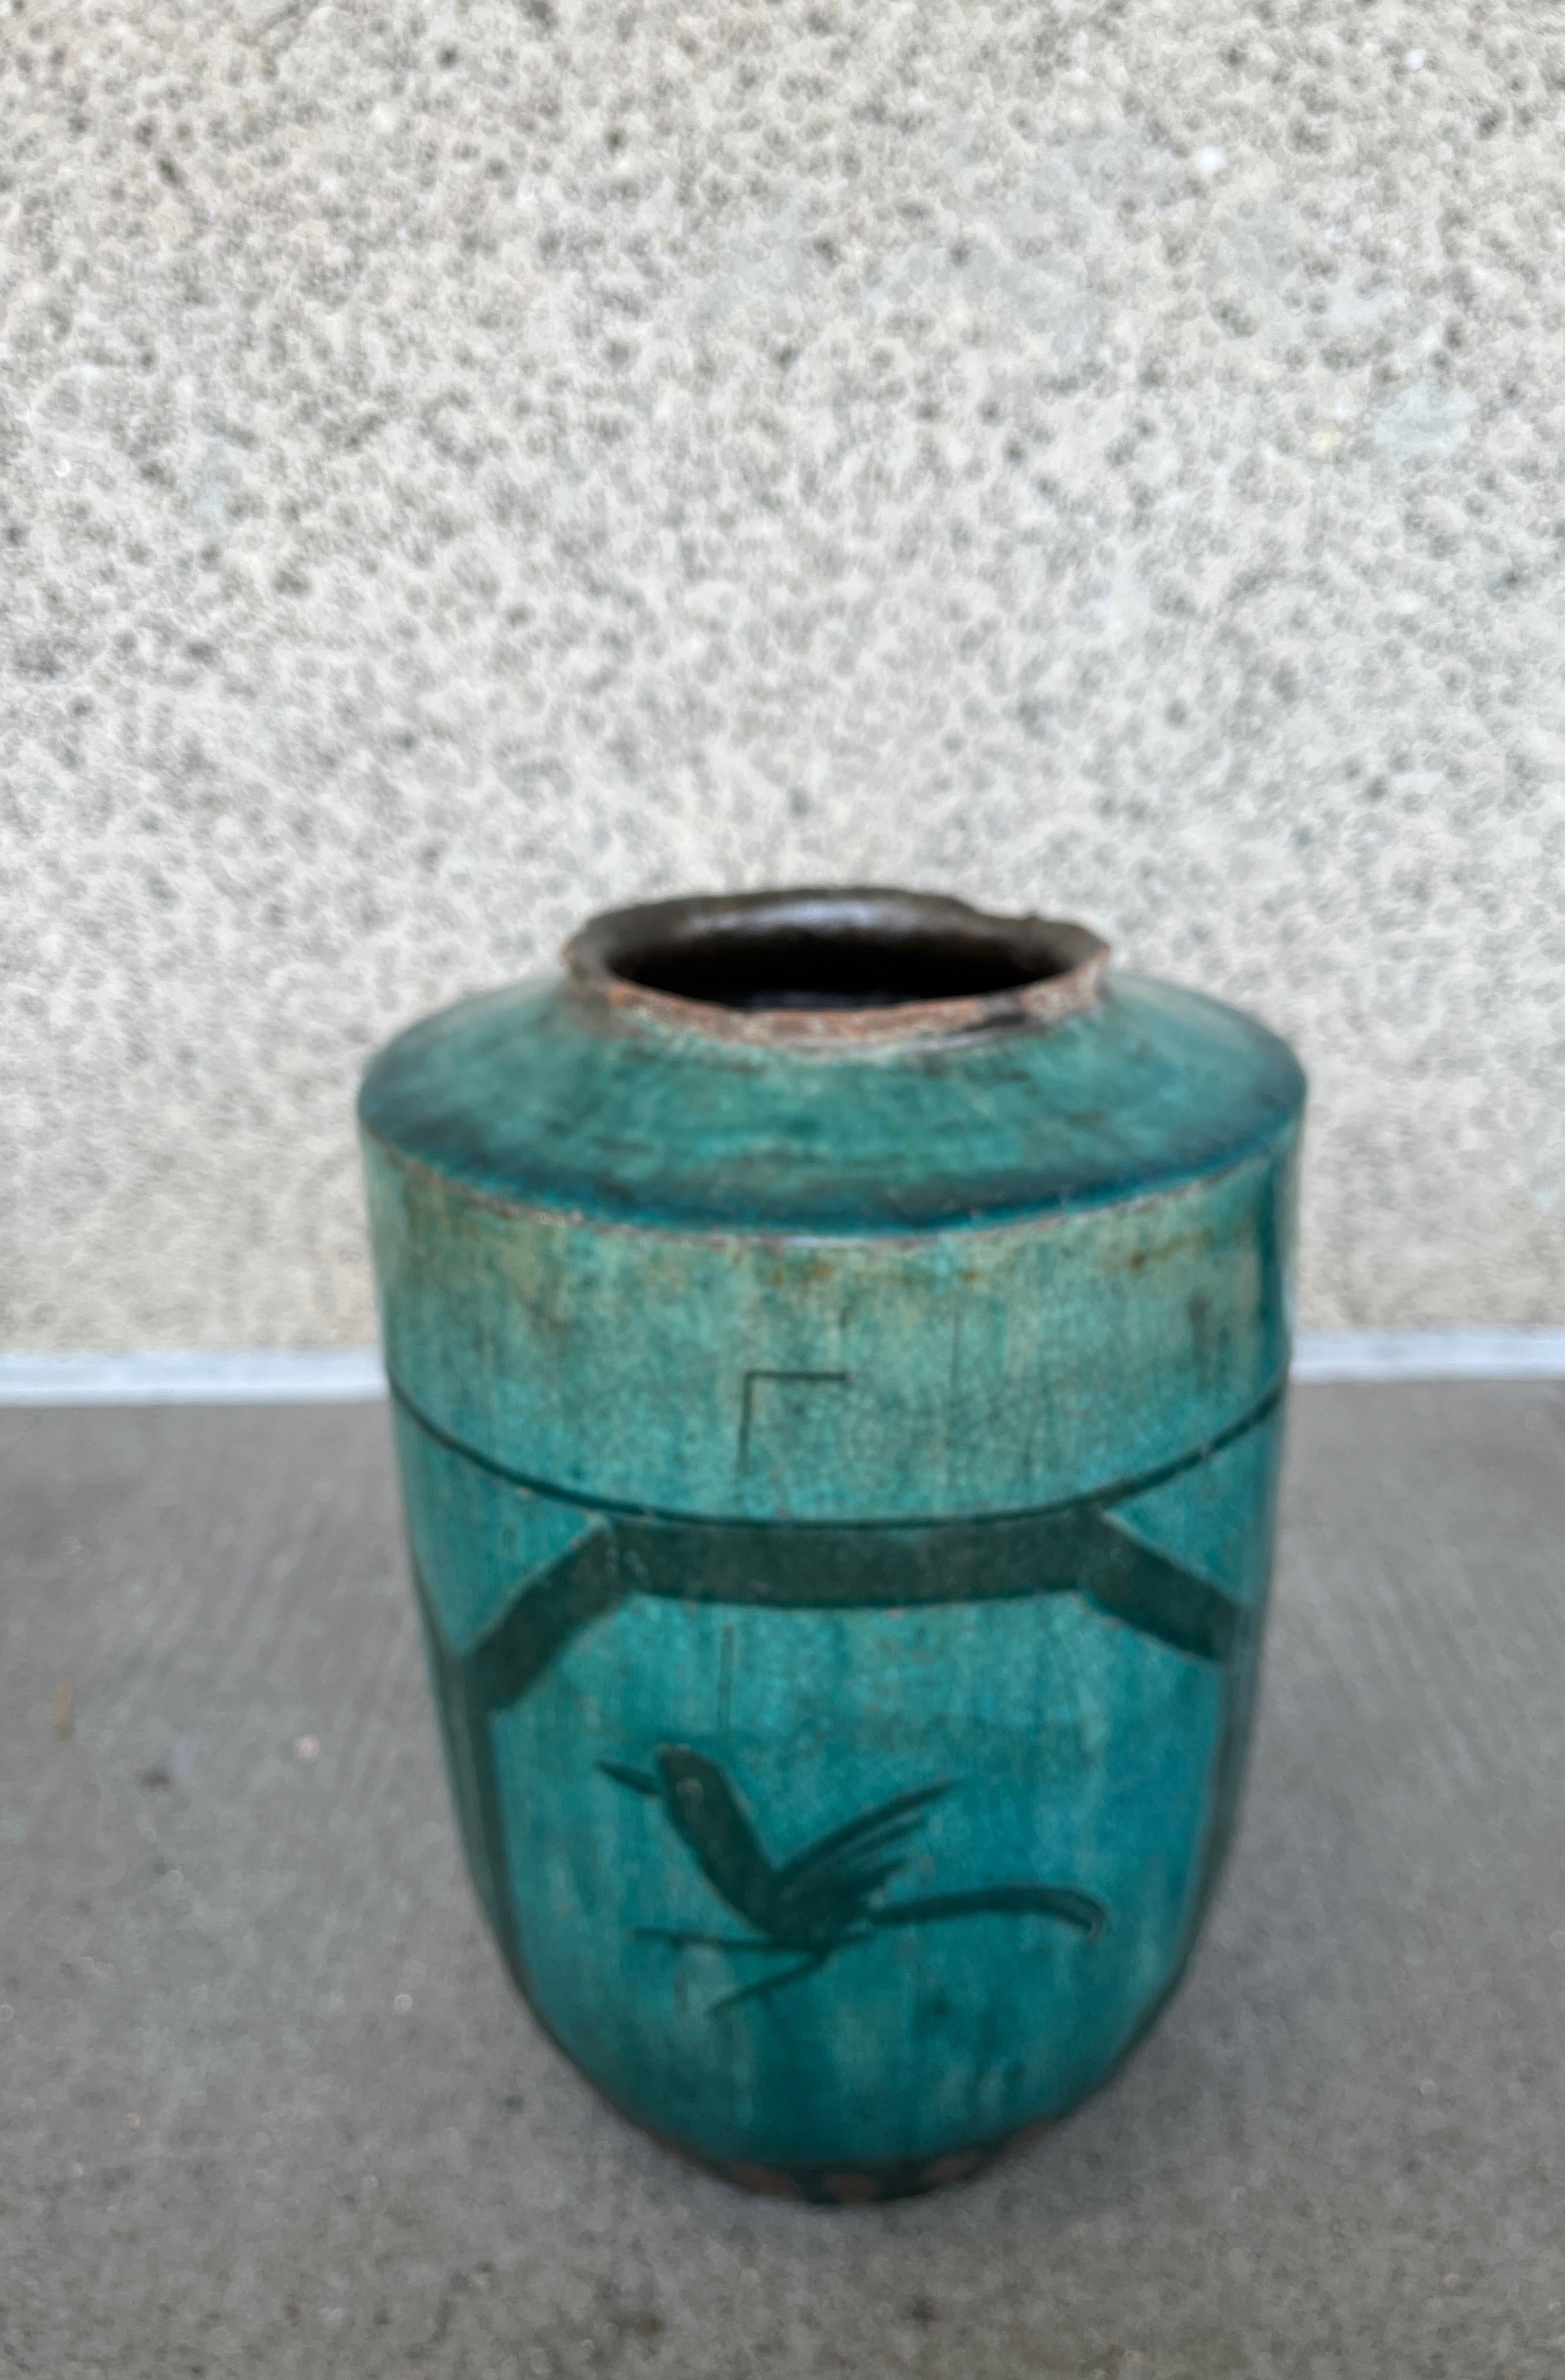 Antique Chinese Hand Painted Ceramic Jar with Bird Image For Sale 13